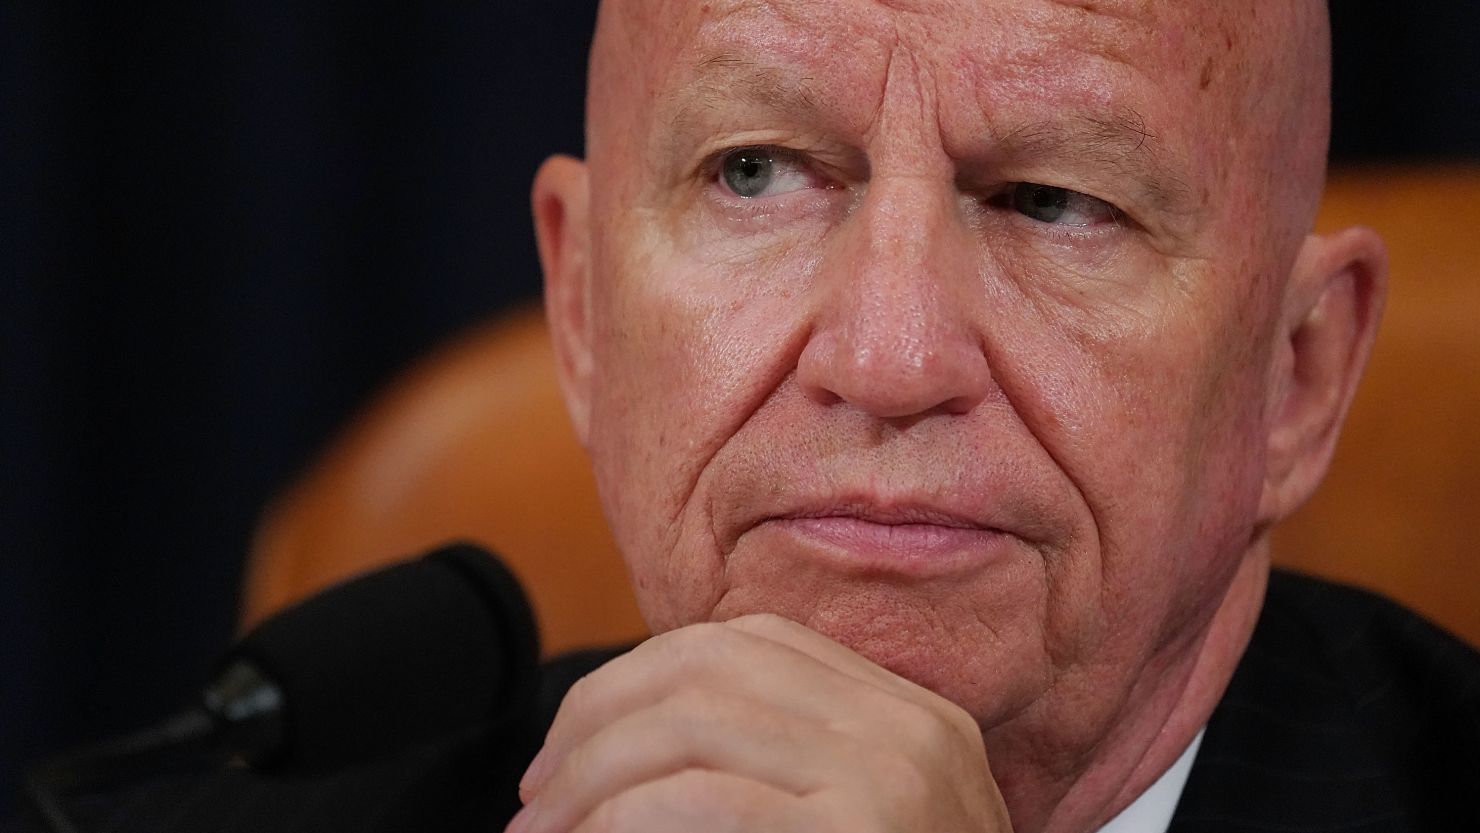 House Ways and Means Committee Chairman Kevin Brady (R-TX) presides over a markup session of the proposed GOP tax reform legislation in the Longworth House Office Building on Capitol Hill November 6, 2017 in Washington, DC. 